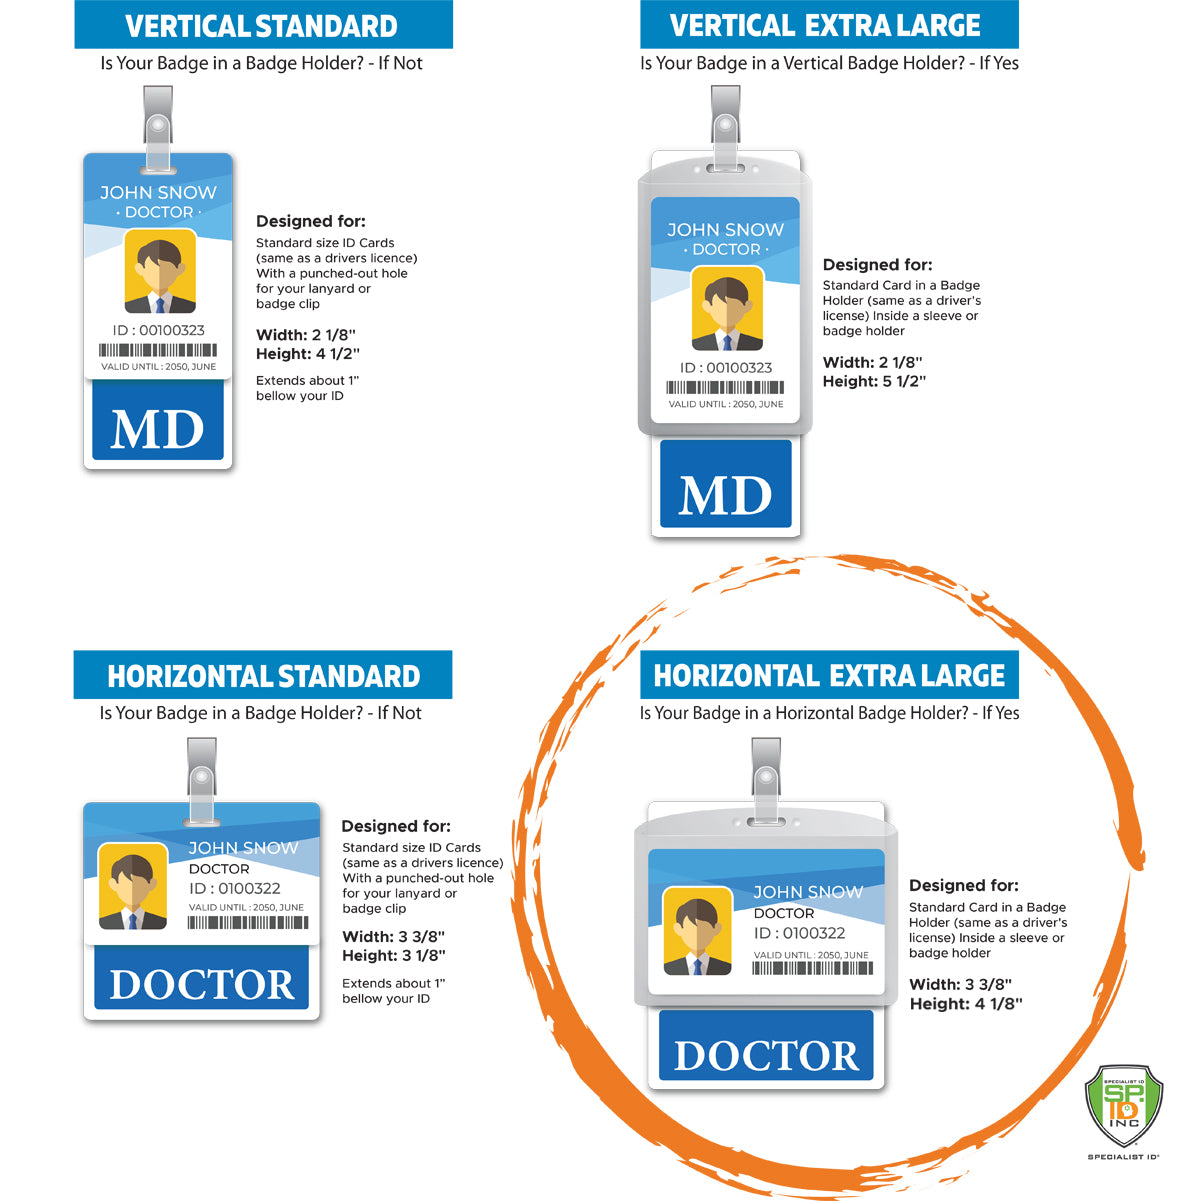 Four types of badge holders are displayed with dimensions and details. The badge holders are for vertical standard, vertical extra-large, horizontal standard, and horizontal extra-large badges, including options perfect for an Extra Large RN Badge Buddy - XL Badge Backer for Registered Nurse - Horizontal Hospital ID Badge Buddies.